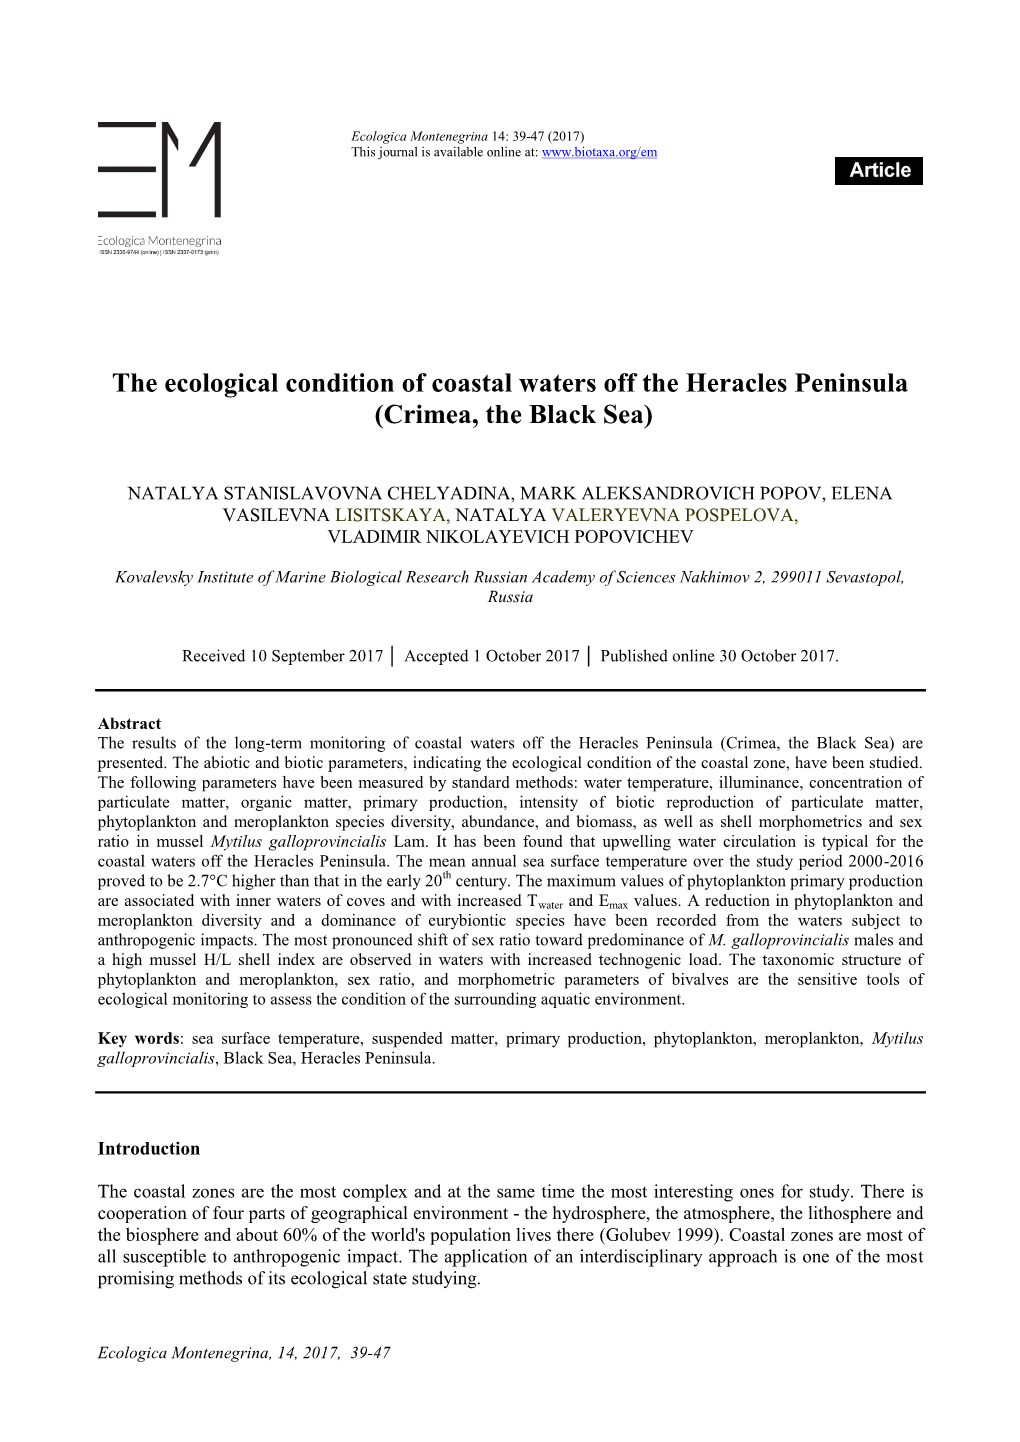 The Ecological Condition of Coastal Waters Off the Heracles Peninsula (Crimea, the Black Sea)